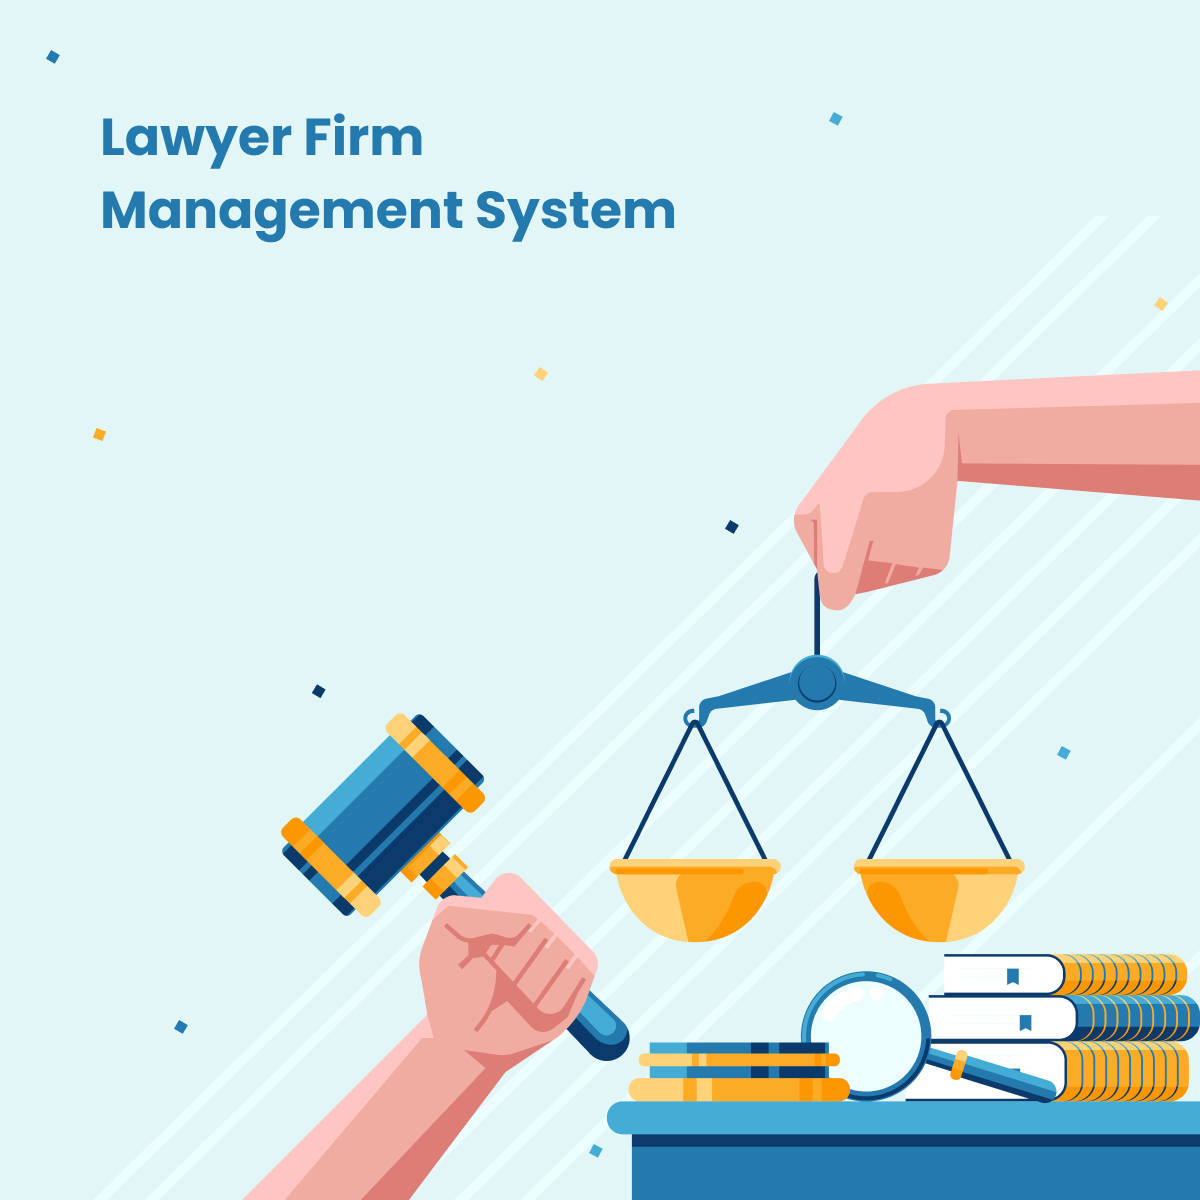 Lawyer firm management system